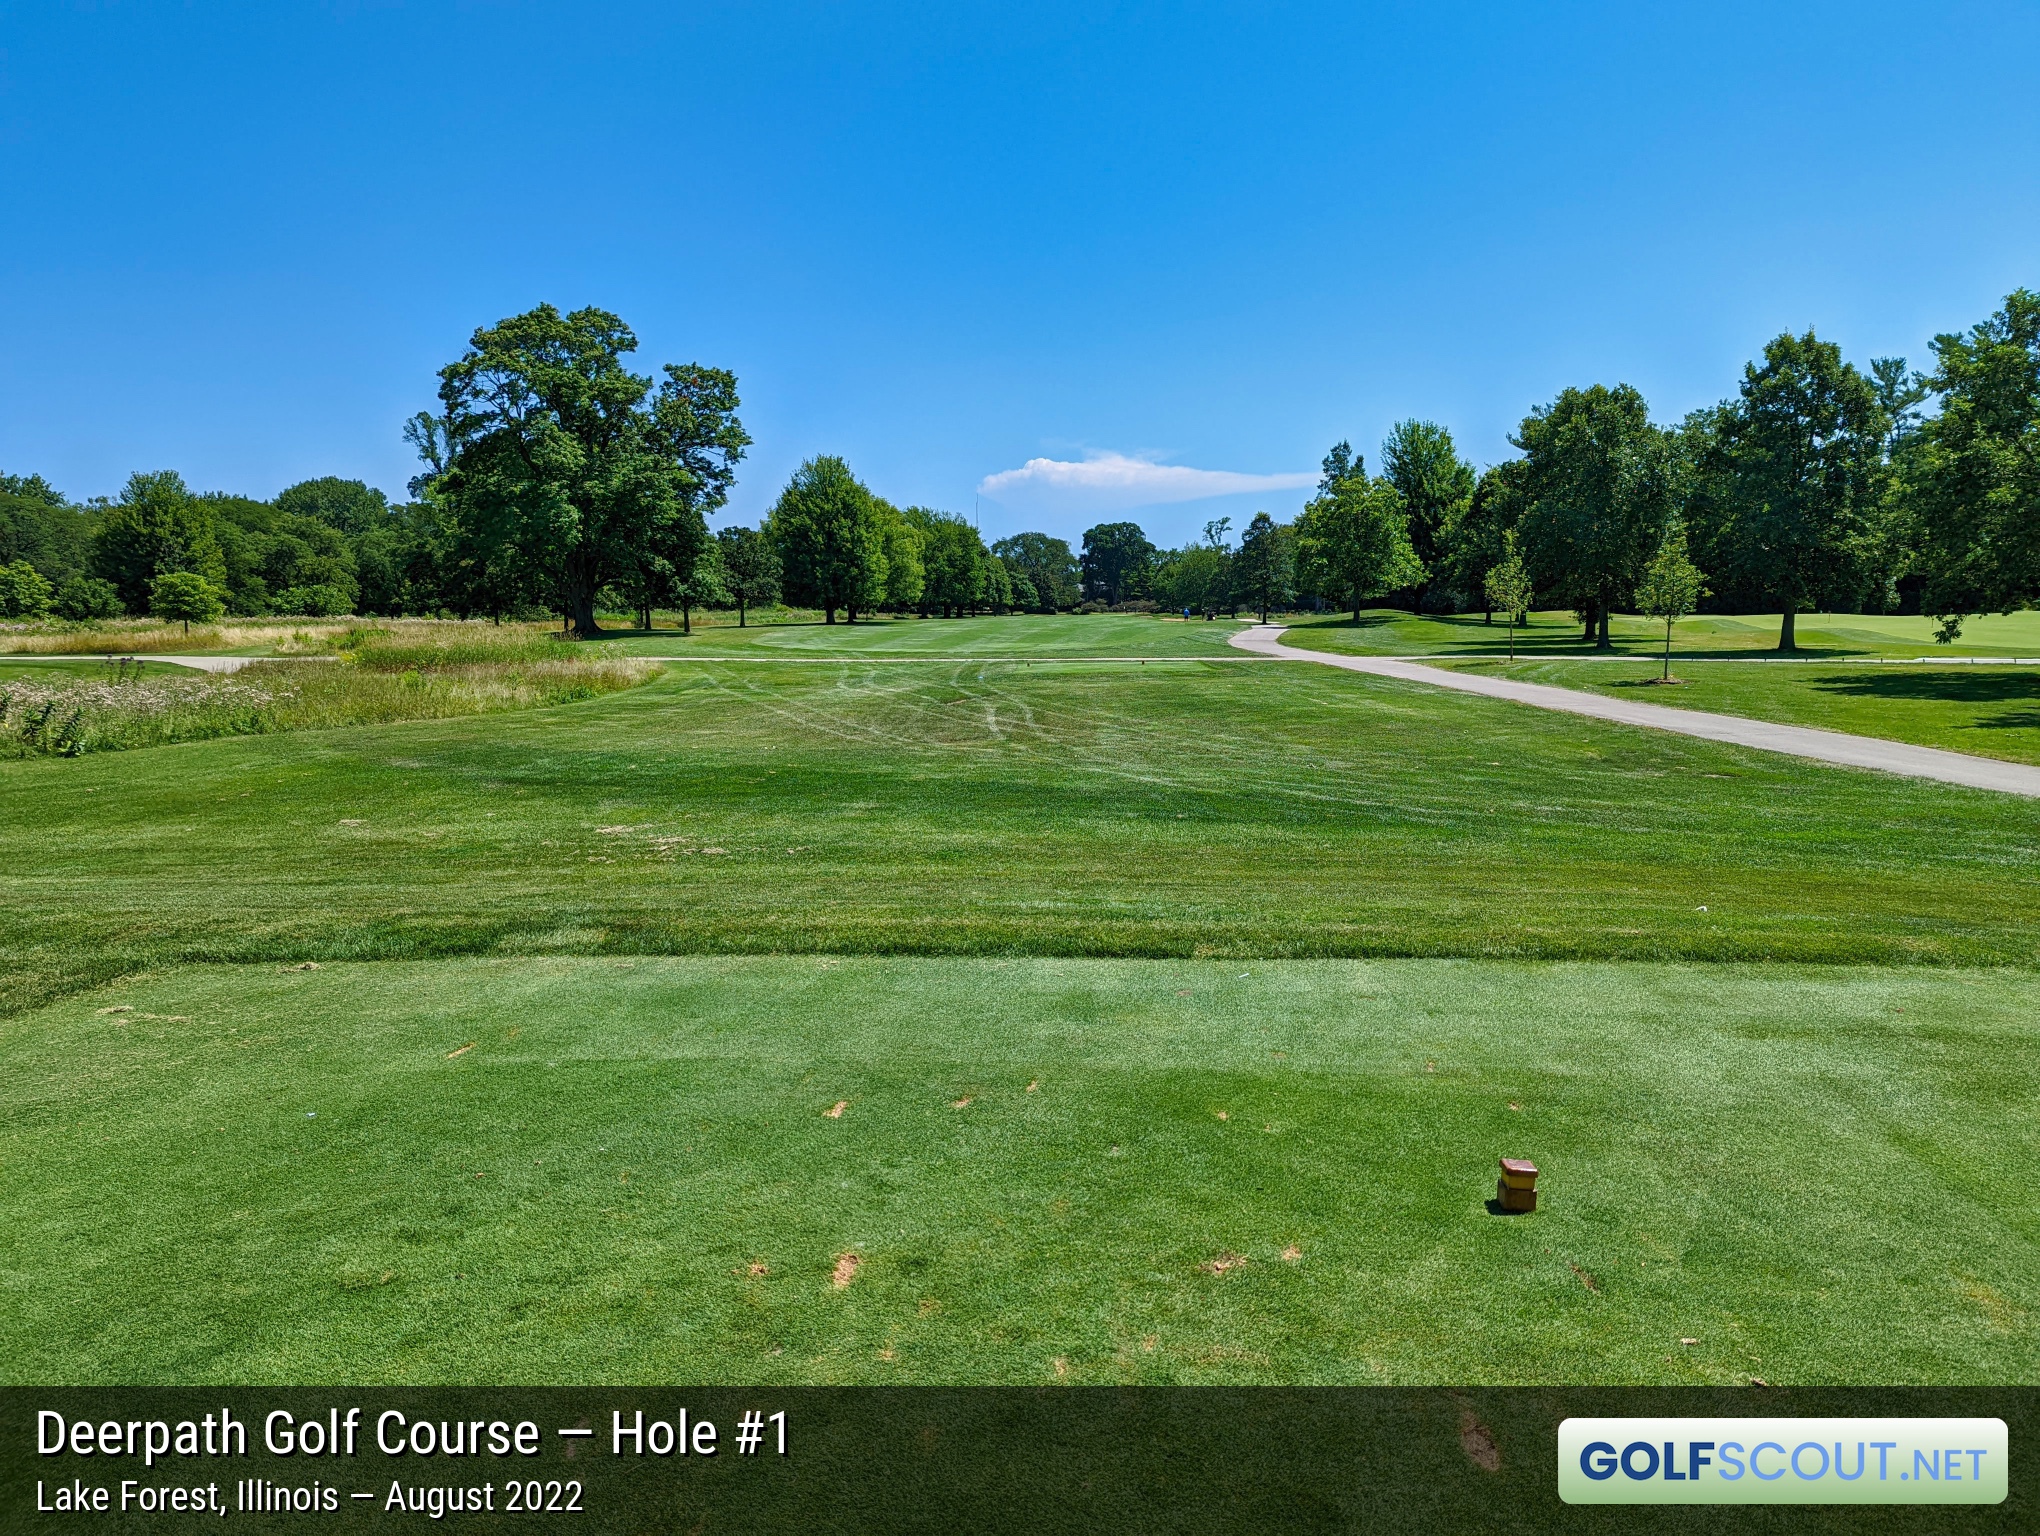 Photo of hole #1 at Deerpath Golf Course in Lake Forest, Illinois. 